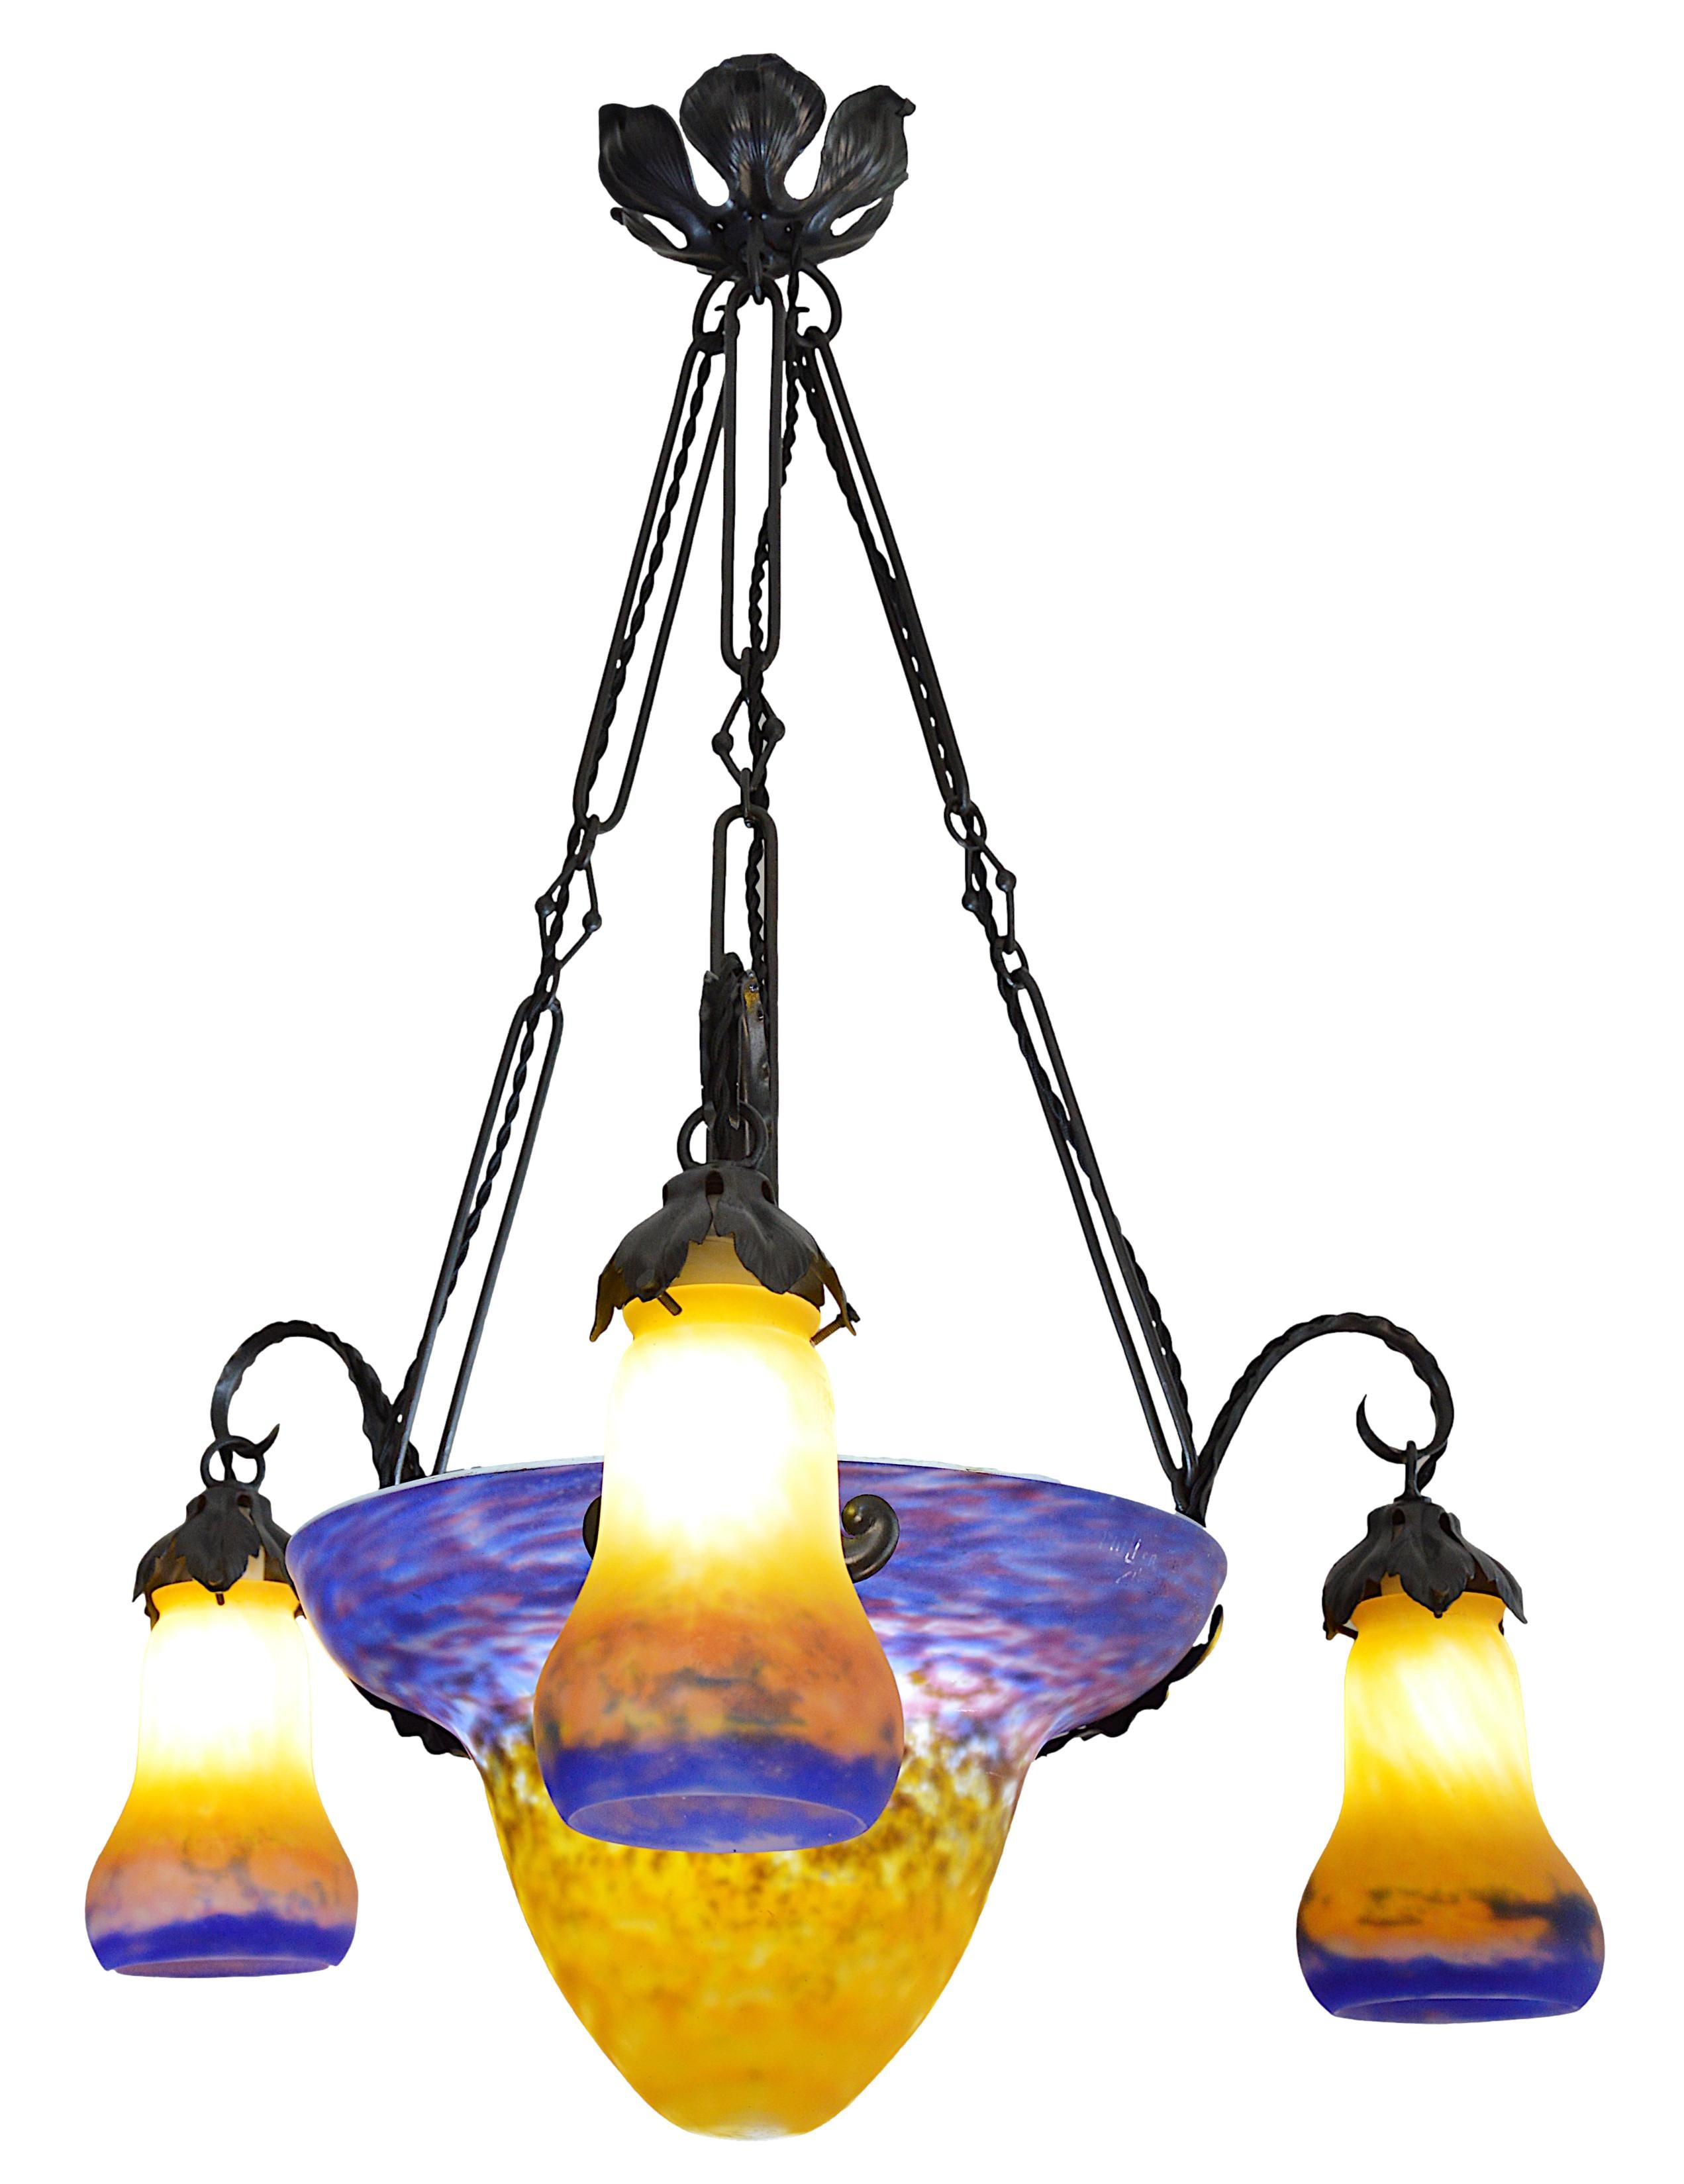 Muller Freres French Art Deco Chandelier, Ca.1920 In Excellent Condition For Sale In Saint-Amans-des-Cots, FR